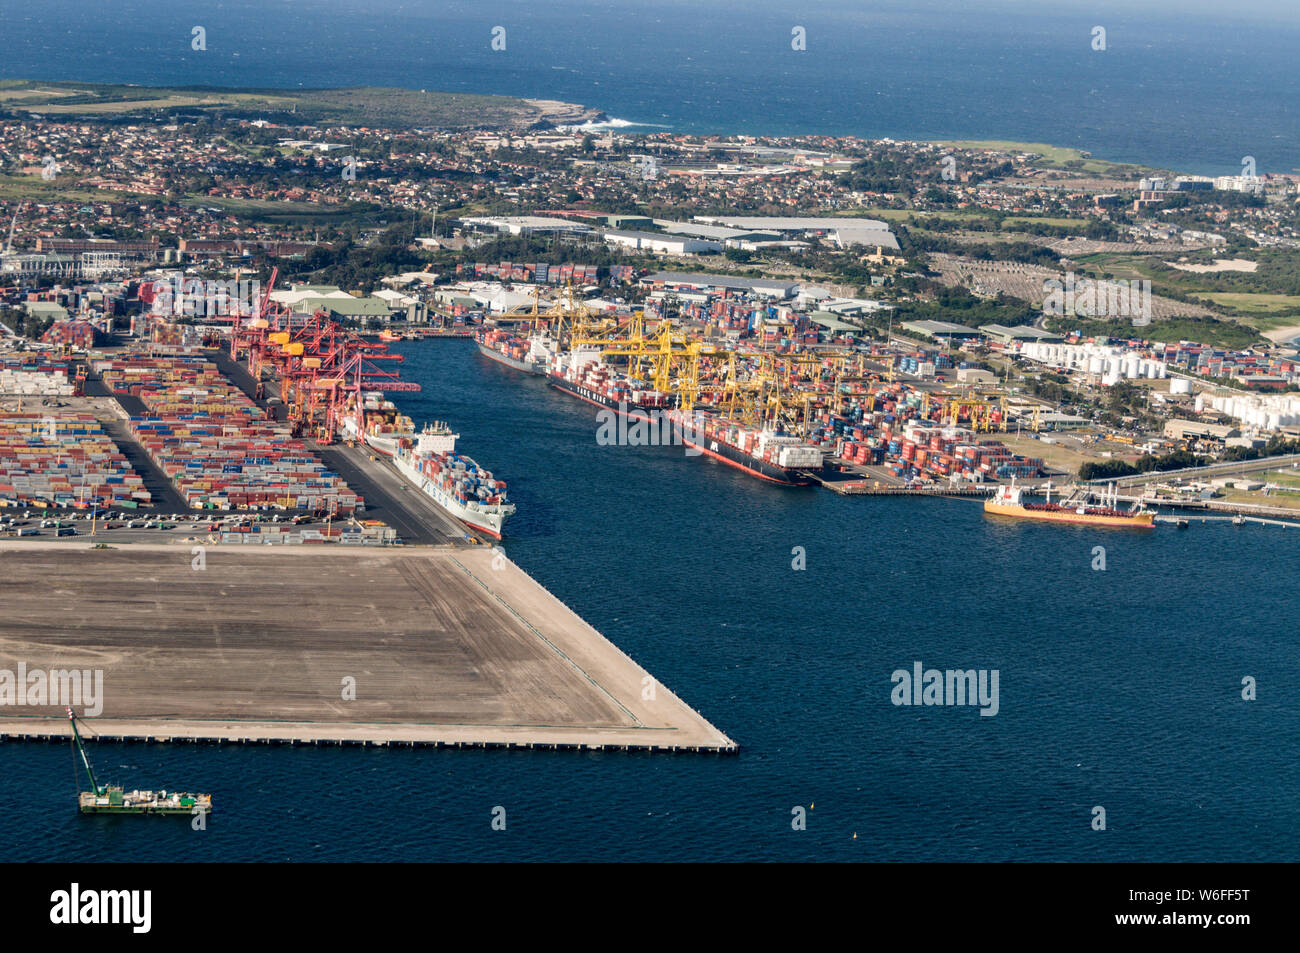 Sydney container port, the largest port in Australia at Port Botany, a suburb in south-eastern Sydney in New South Wales, Australia Stock Photo